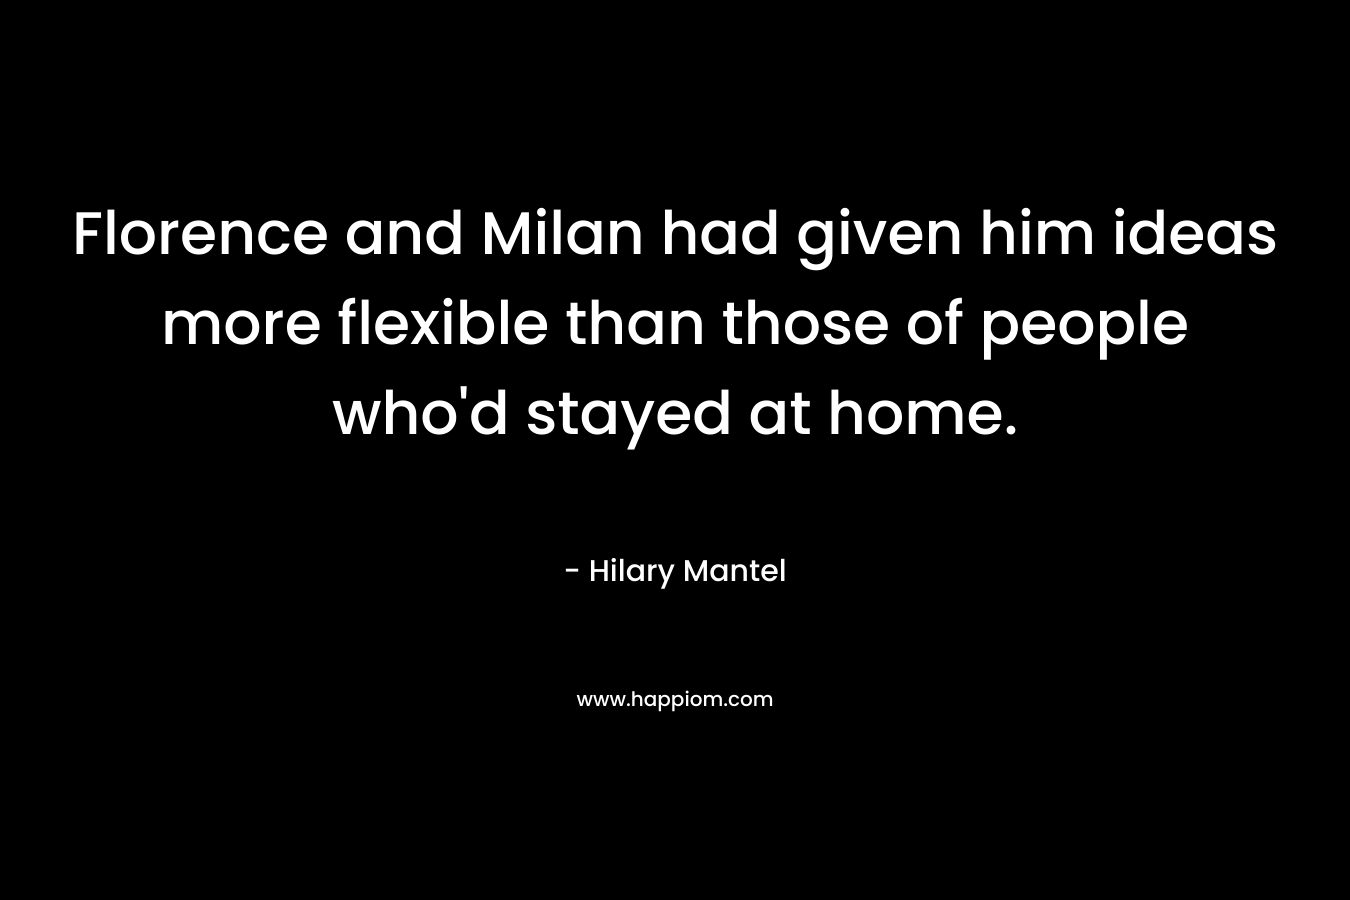 Florence and Milan had given him ideas more flexible than those of people who'd stayed at home.